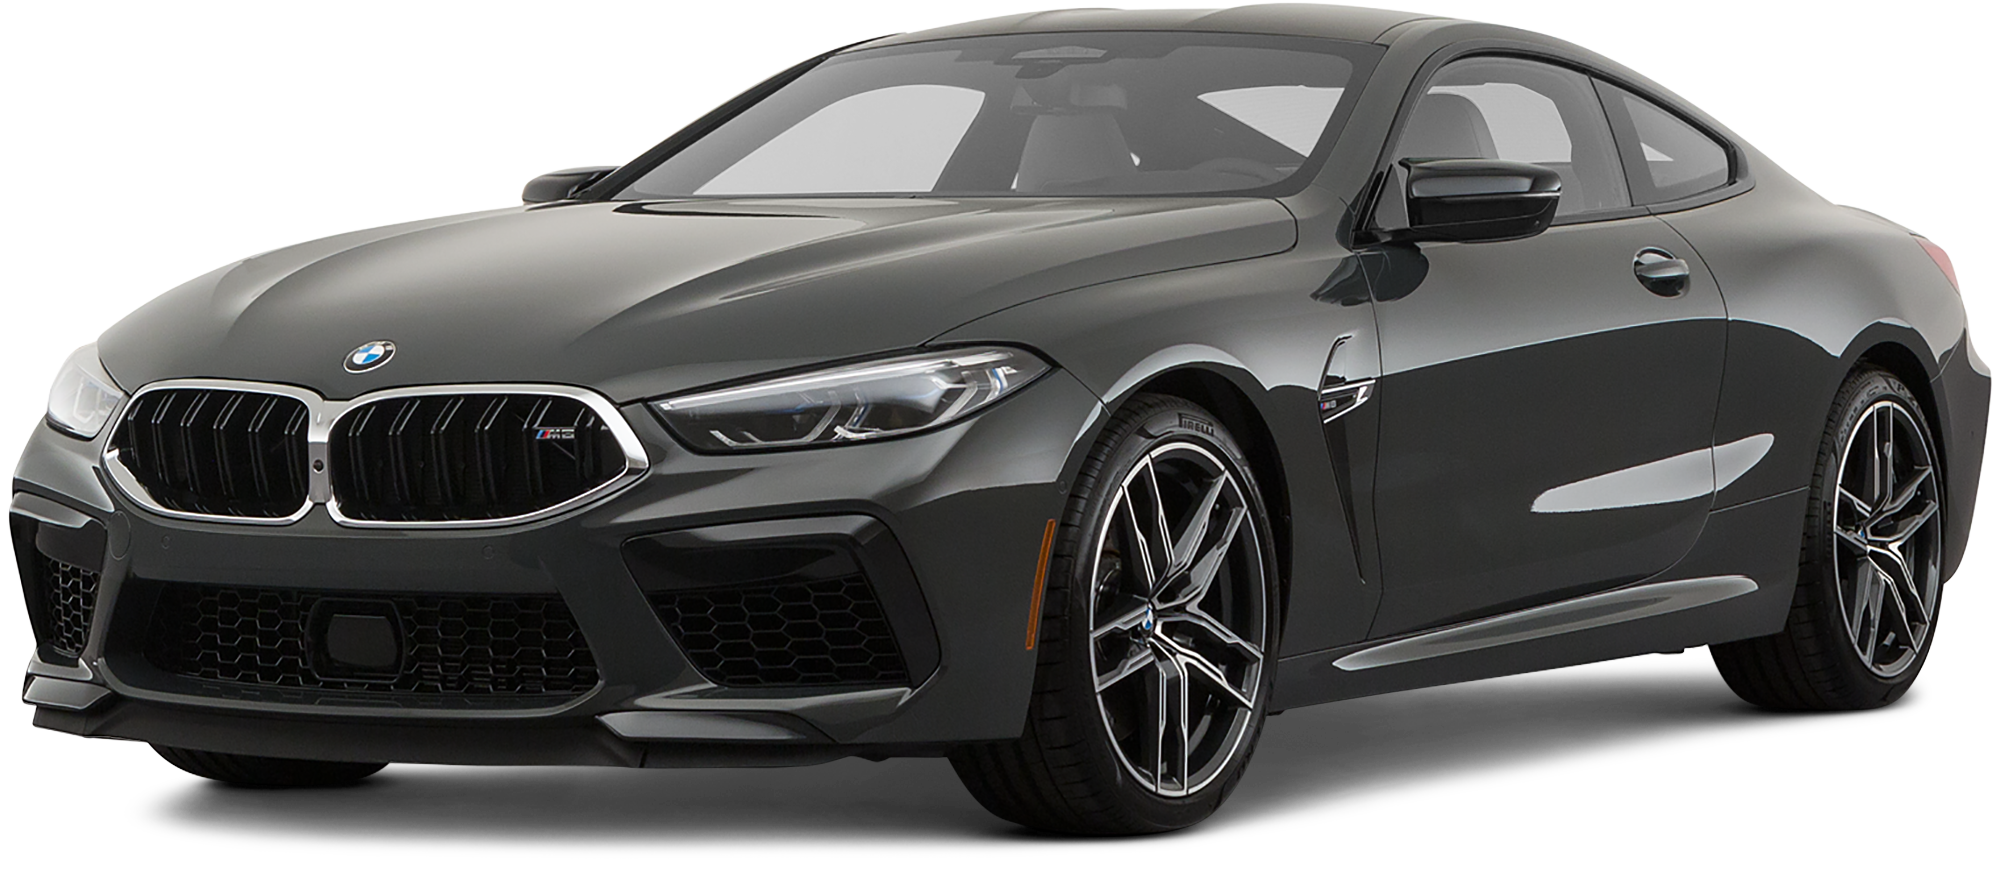 2020 BMW M8 Incentives, Specials & Offers in Dallas TX